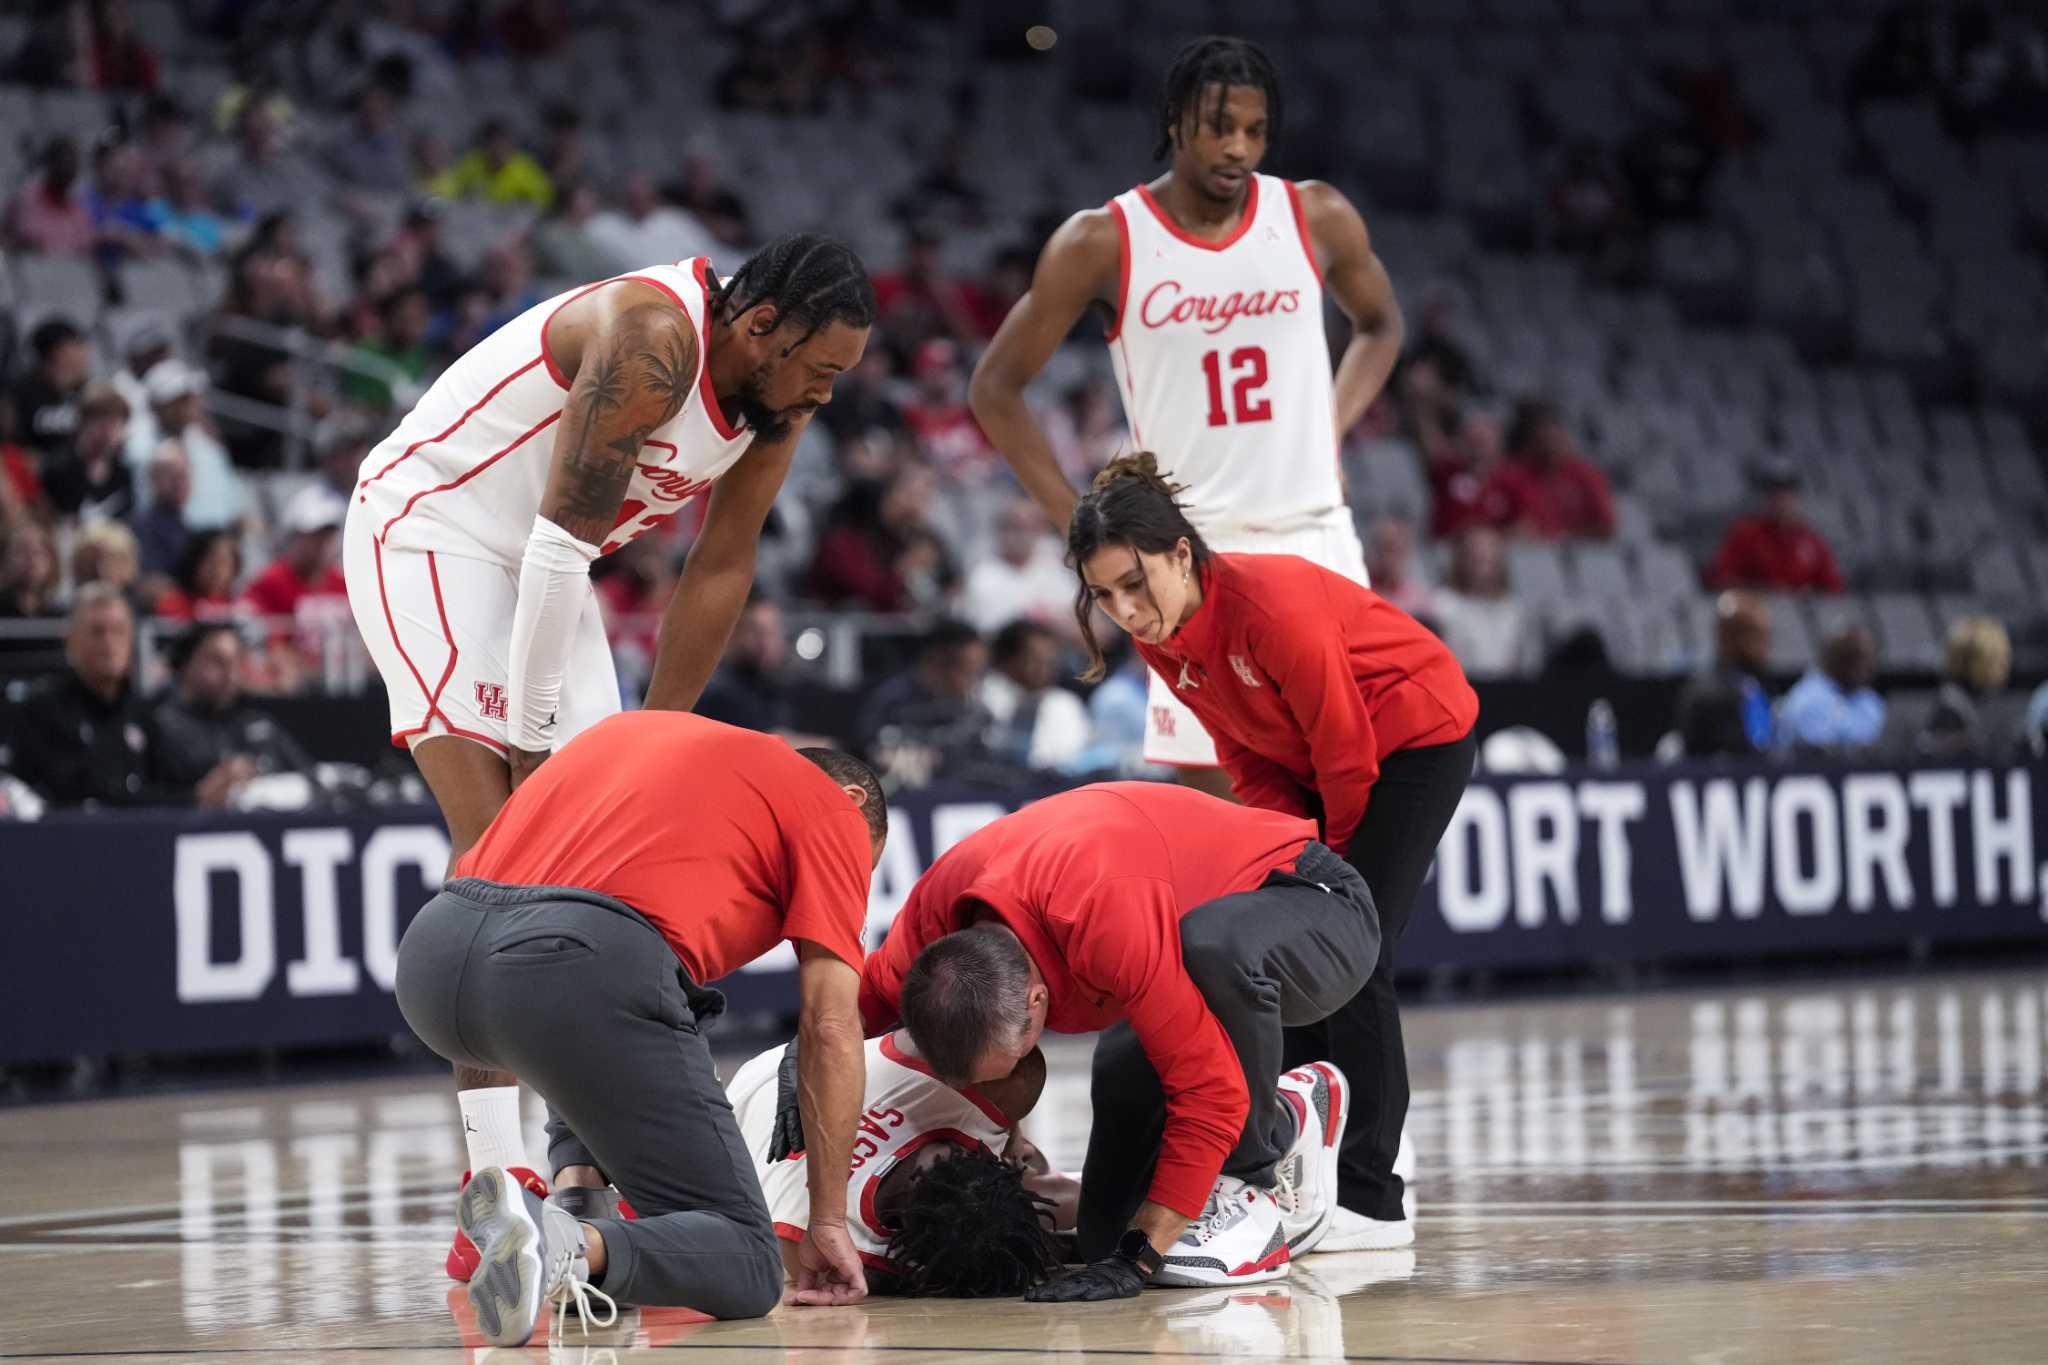 University of Houston men's basketball wins AAC title game with 71